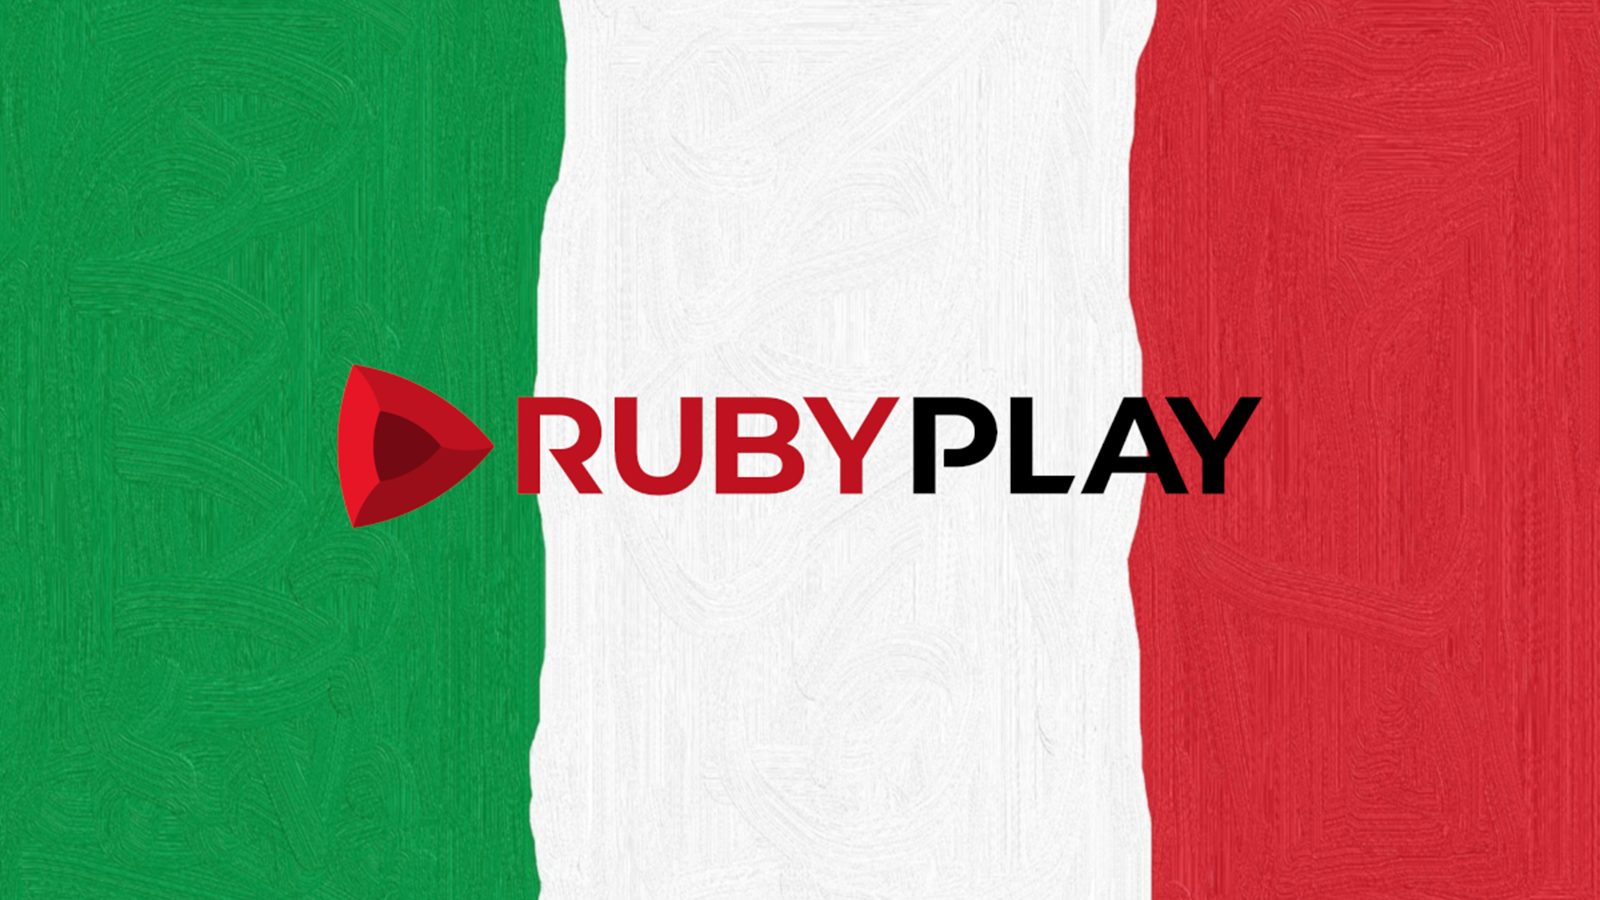 RubyPlay Expands Presence in Italy